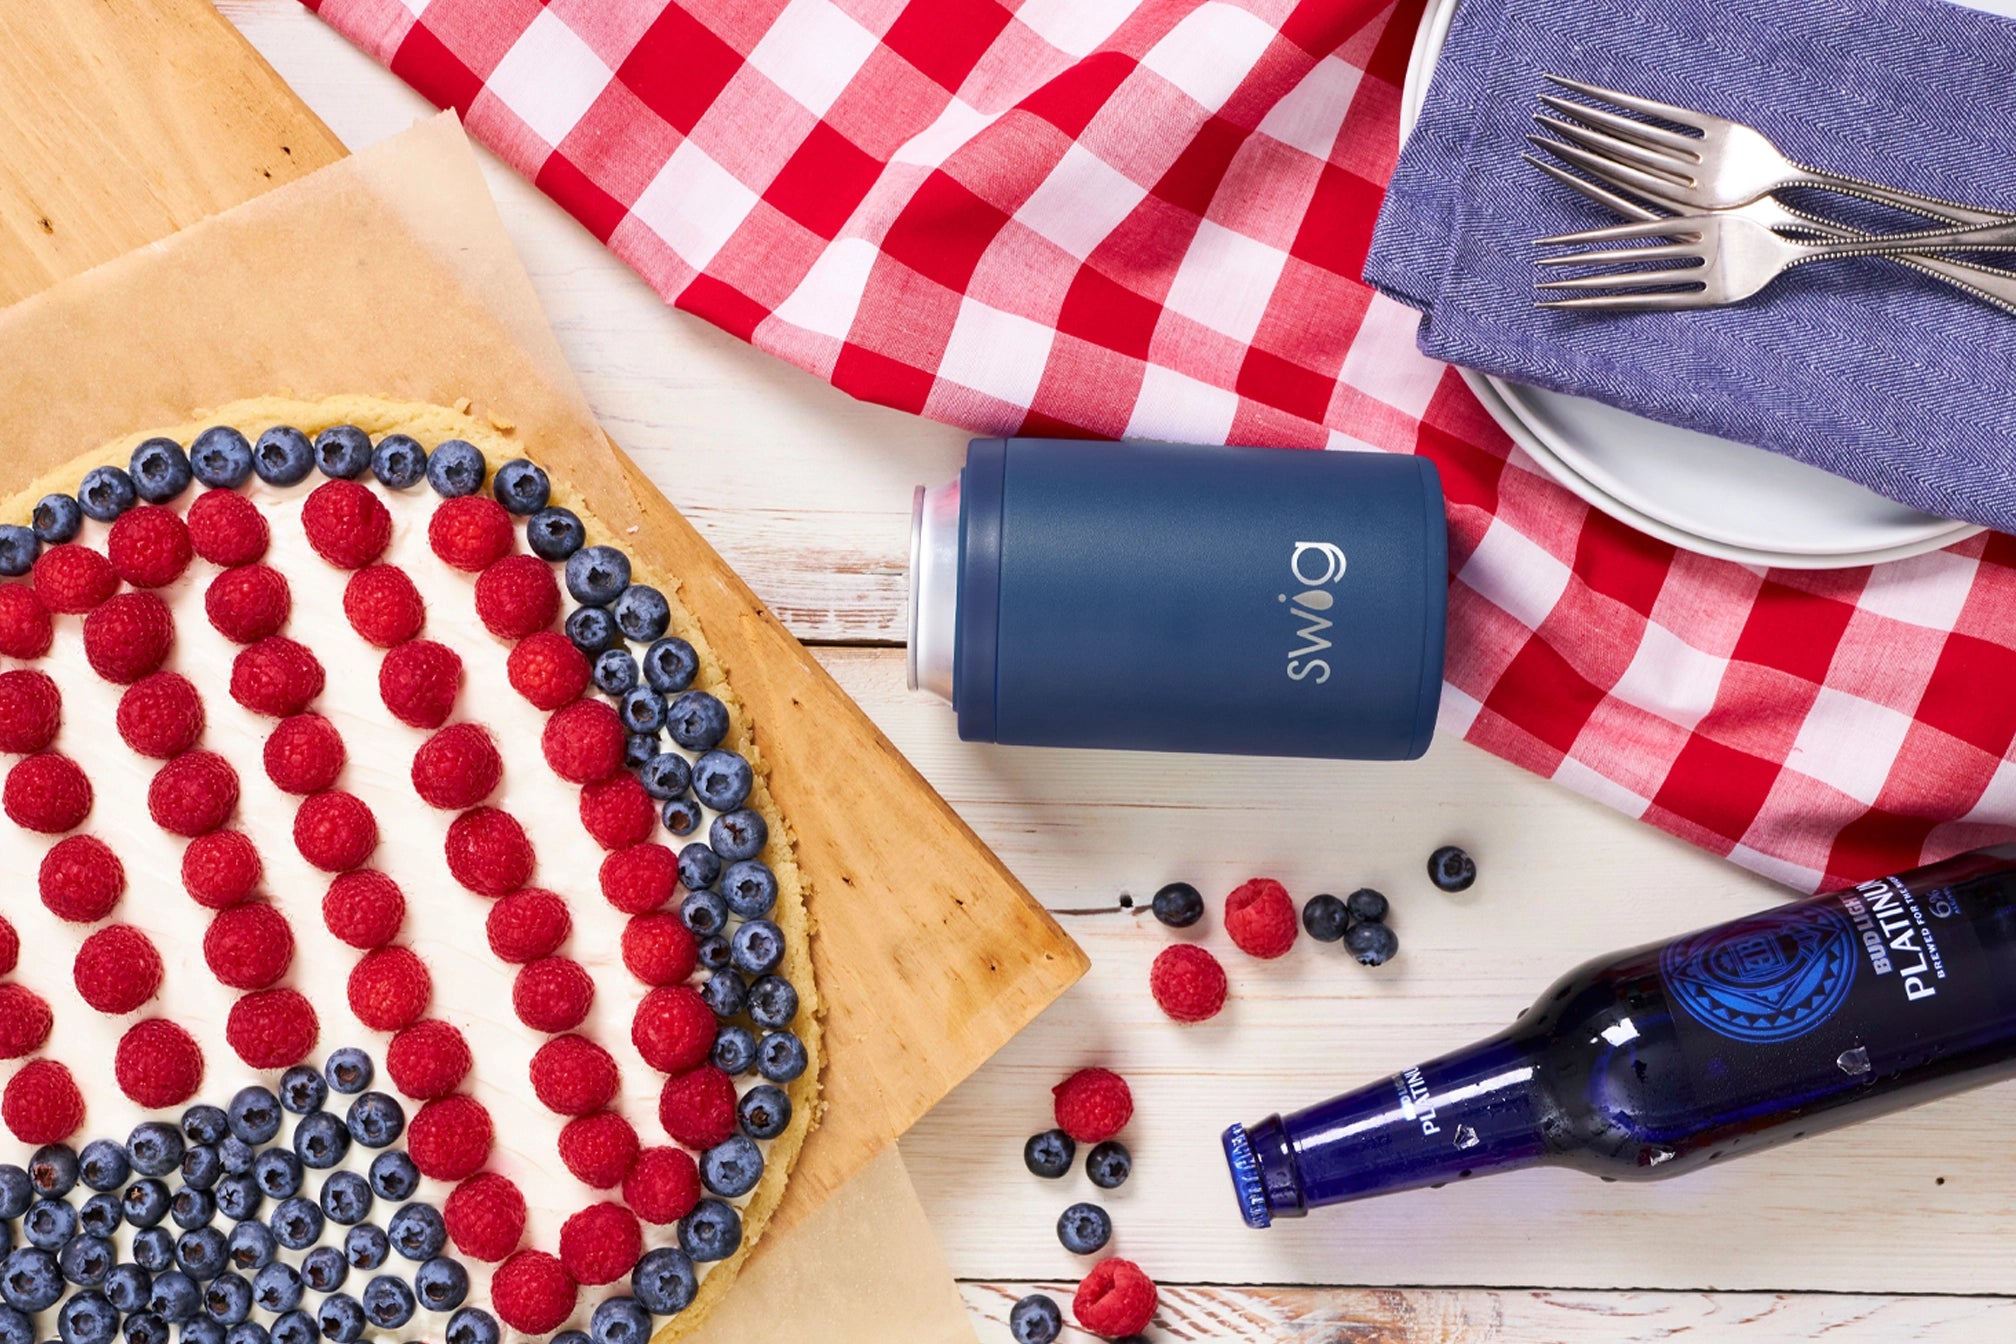 July 4th banner with fruit pie that has American flag design and swig can holder koozie in blue